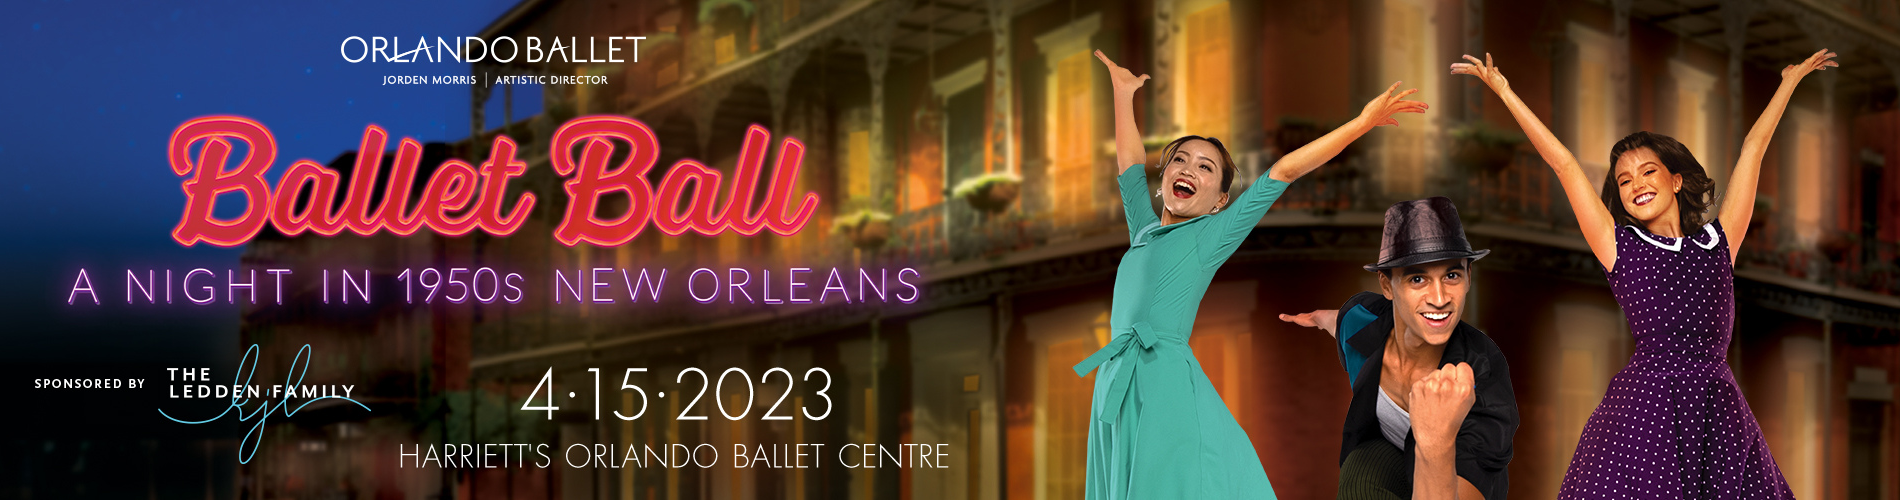 Ballet Ball: A Night in 1950s New Orleans